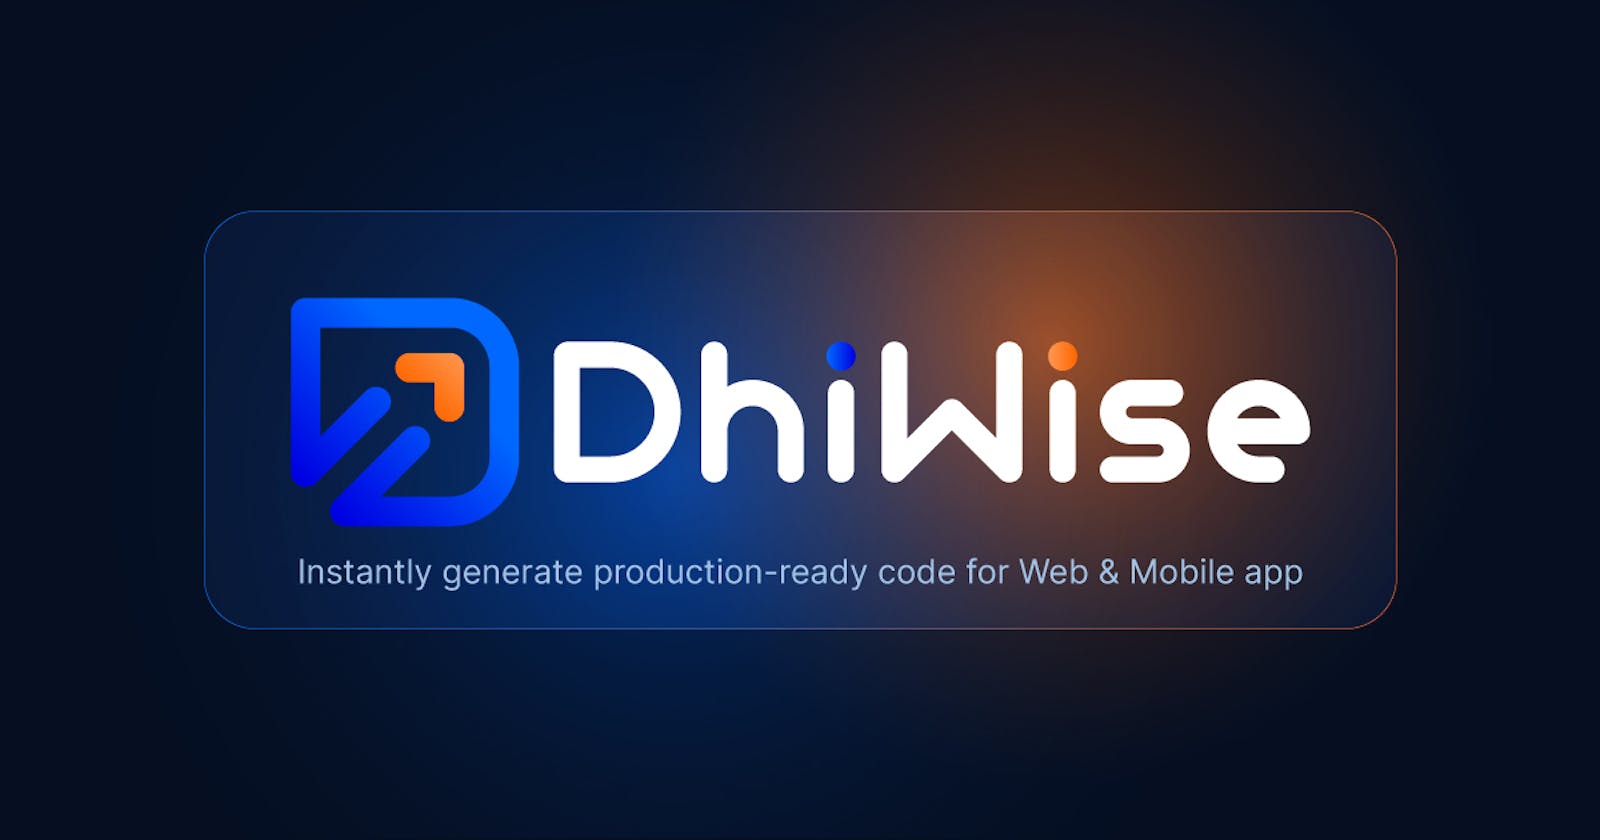 How do I get into DhiWise?